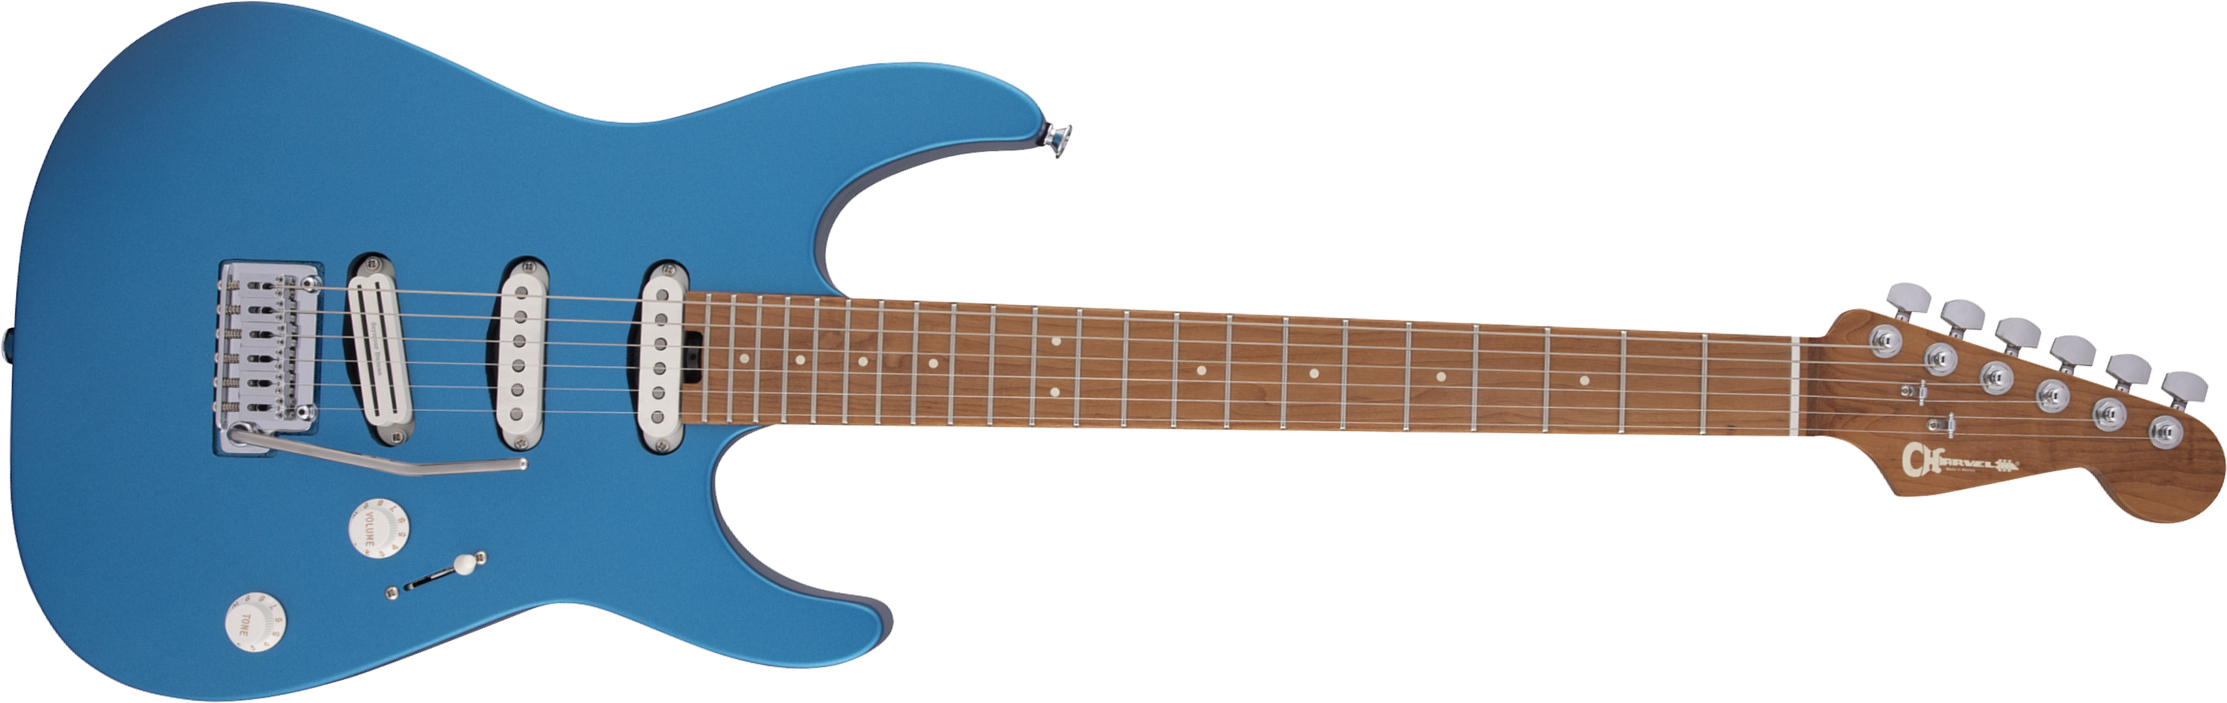 Charvel Dinky Dk22 Sss 2pt Cm Pro-mod 3s Seymour Duncan Mn - Electric Blue - Metal electric guitar - Main picture